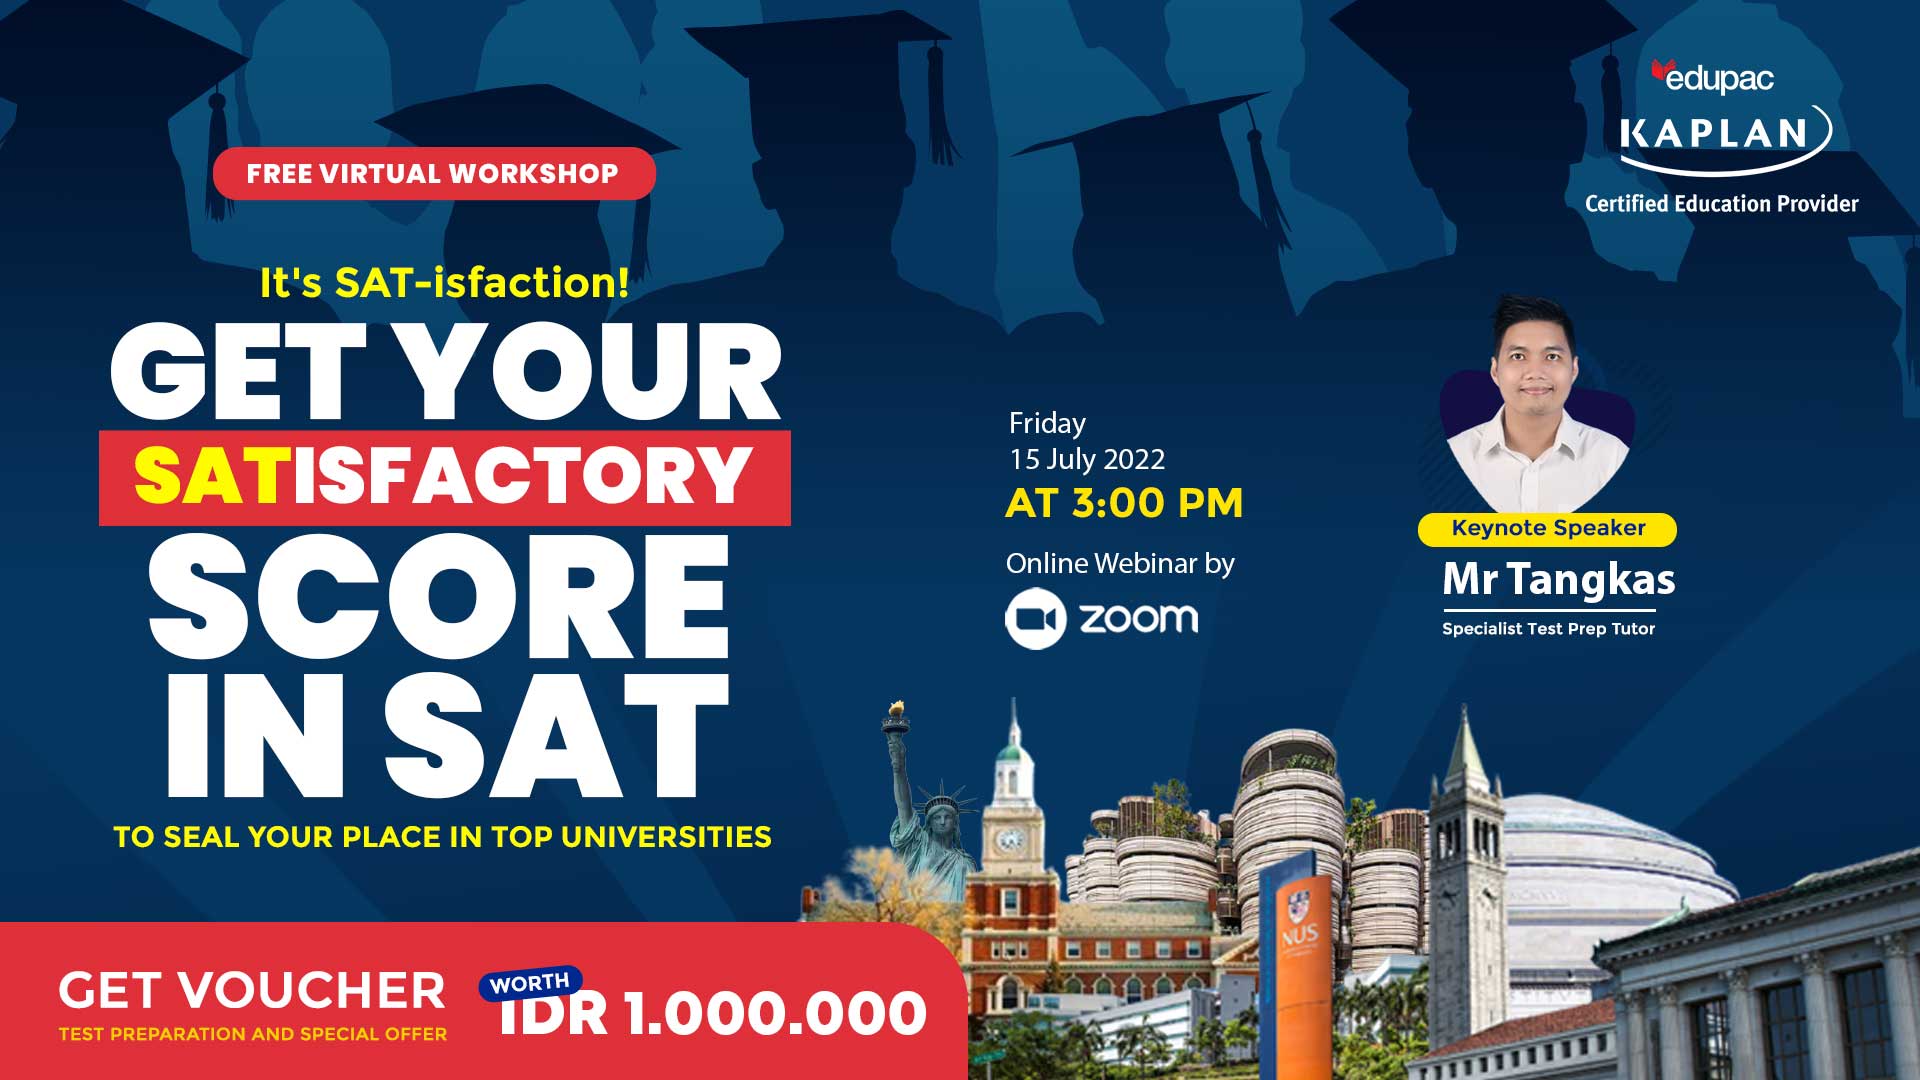 FREE Virtual Workshop: It's SAT-isfaction! "Get Your SATISFACTORY Score in SAT to Seal Your Place in TOP Universities" 